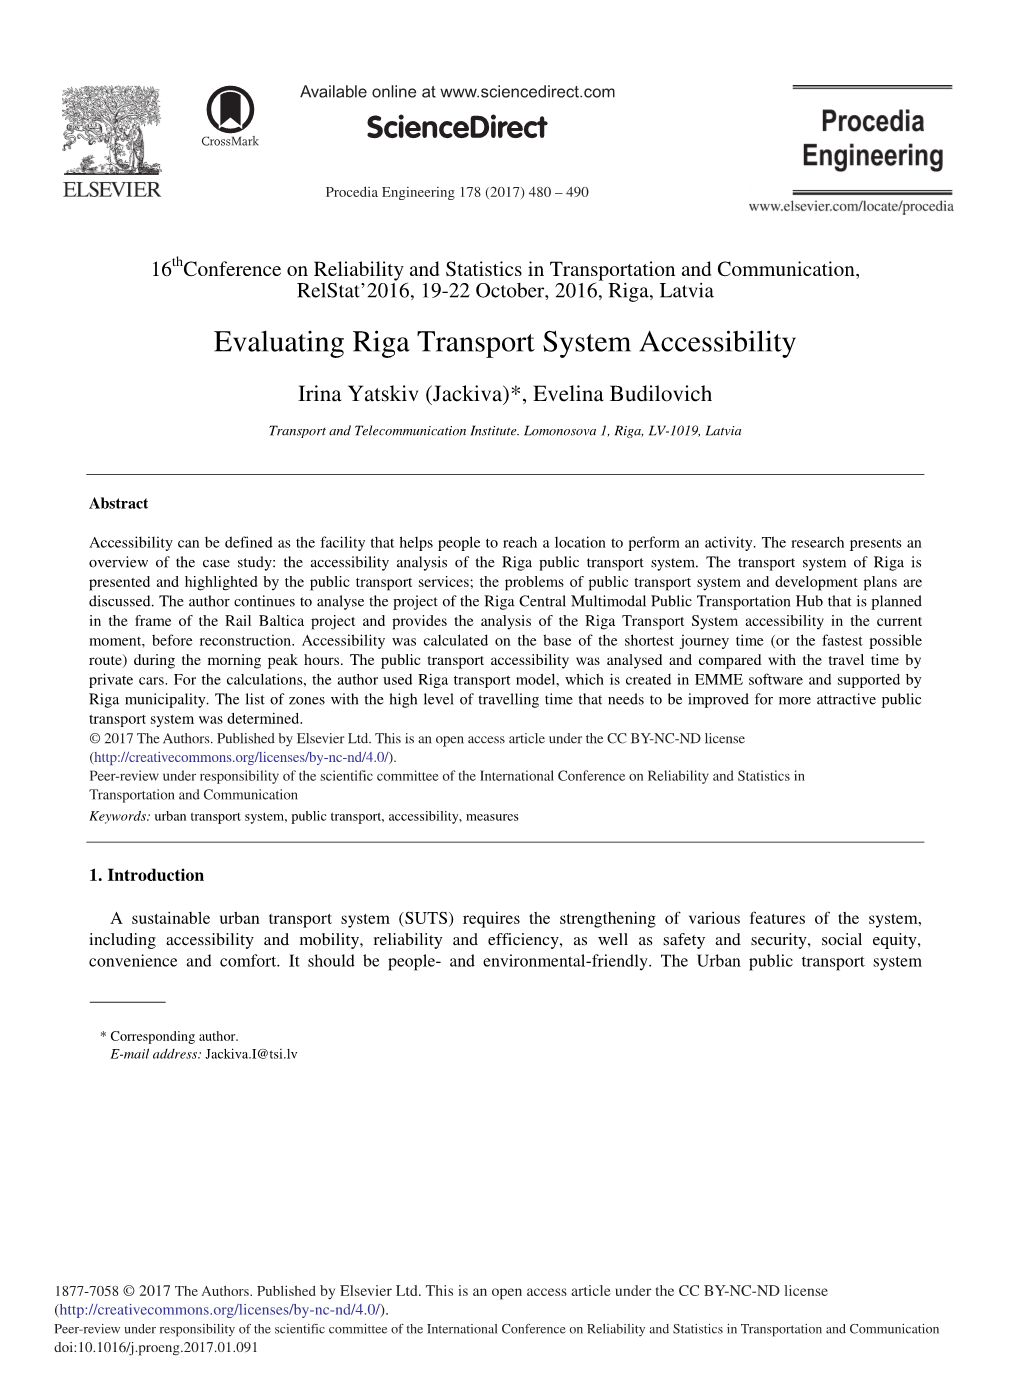 Evaluating Riga Transport System Accessibility